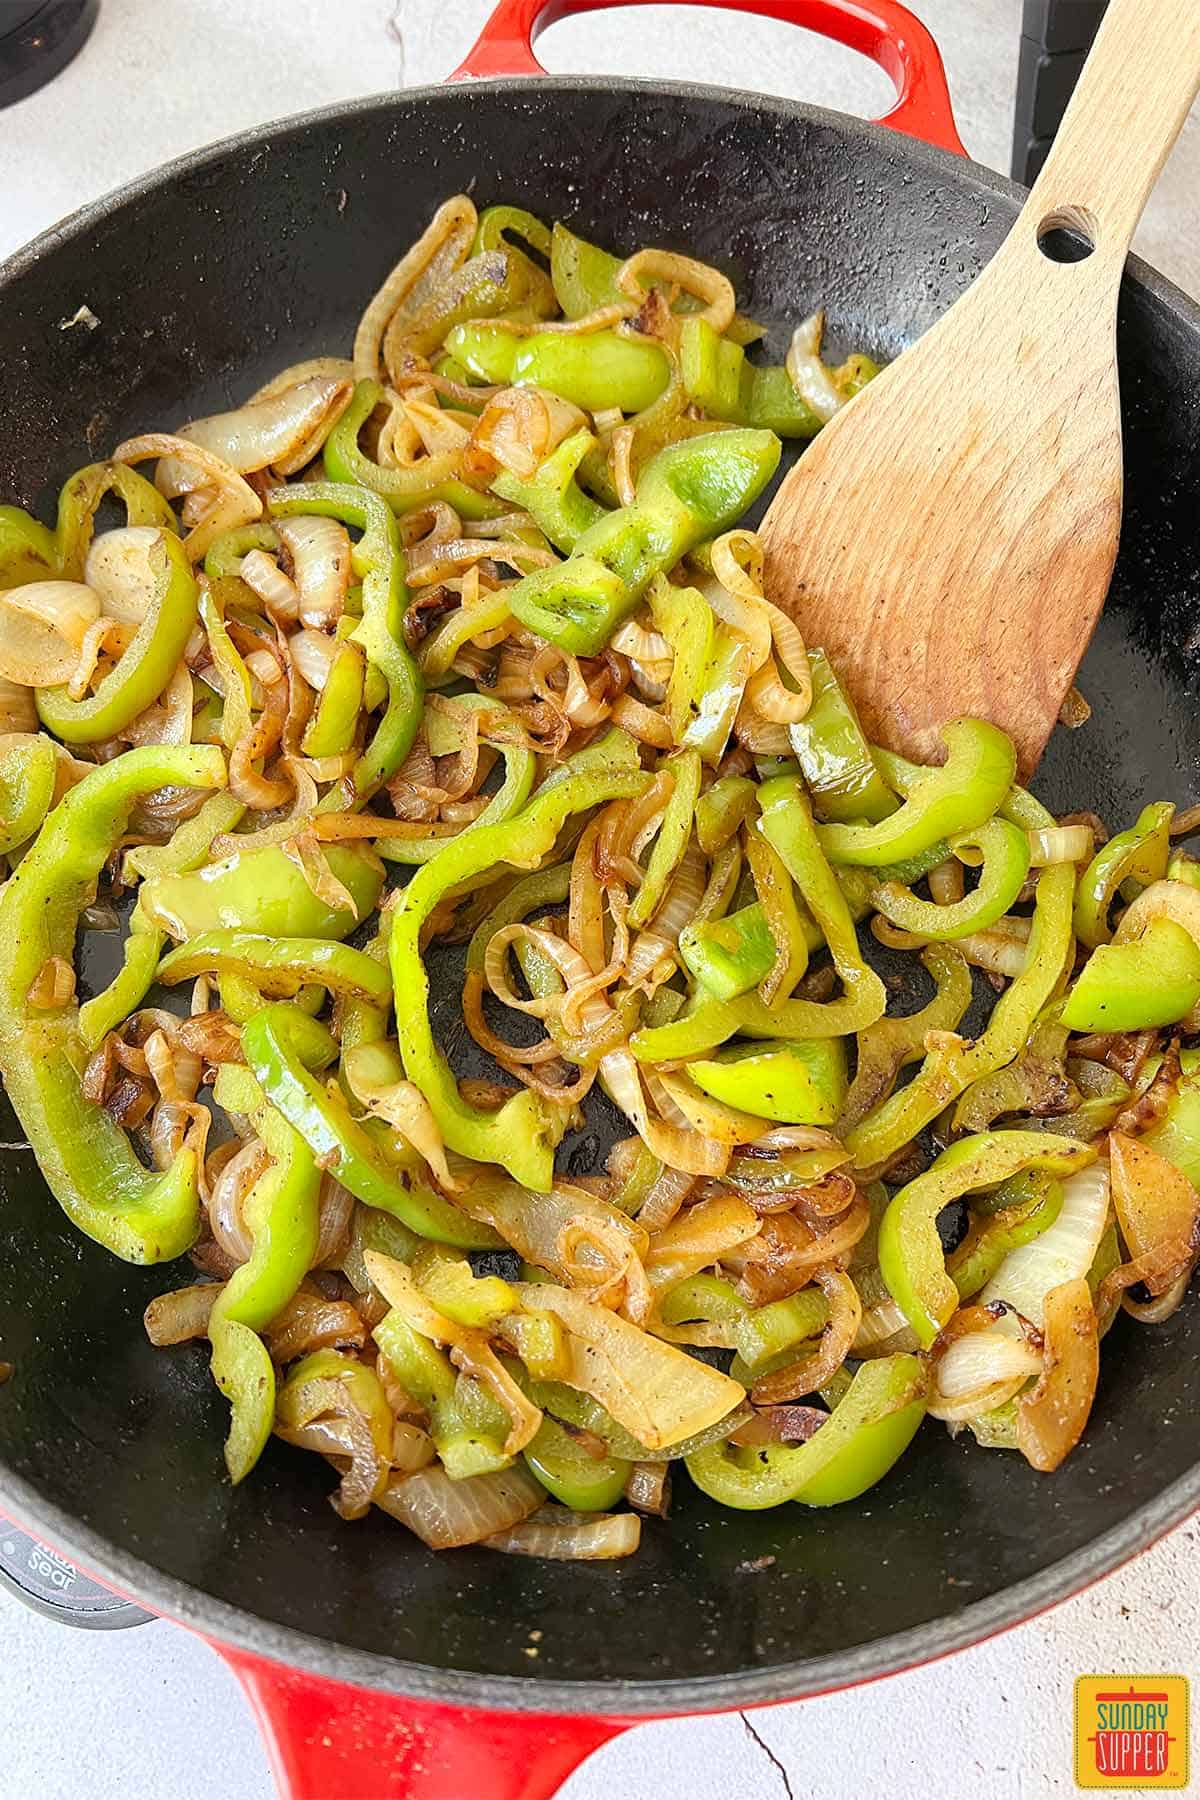 stirring peppers and onions in skillet with wooden spoon